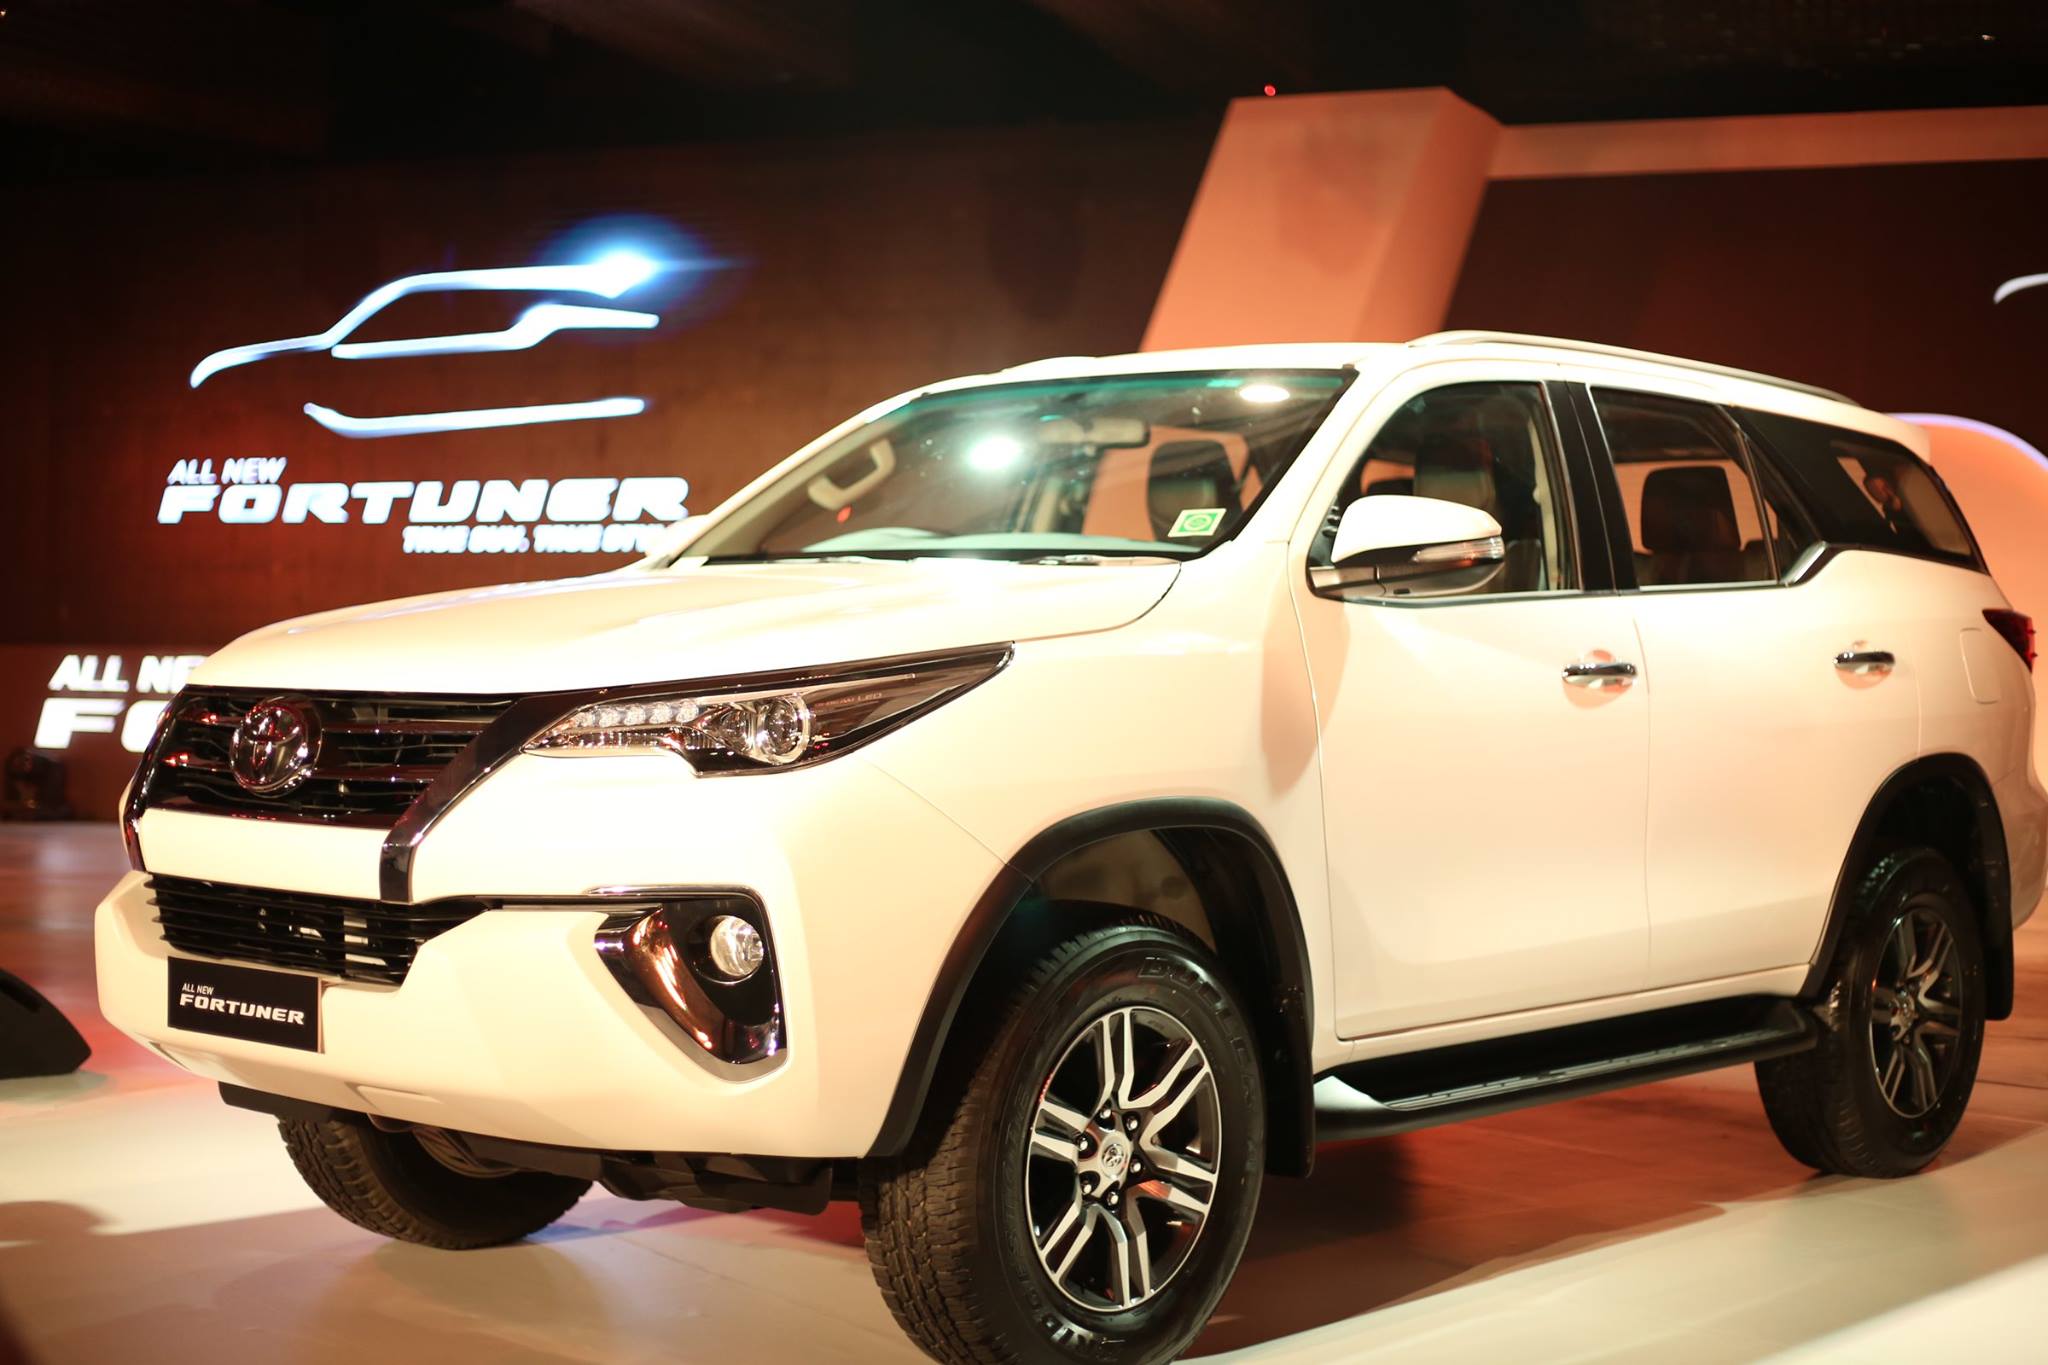 All New Toyota Fortuner launched in India, Price start 25.9 Lakh